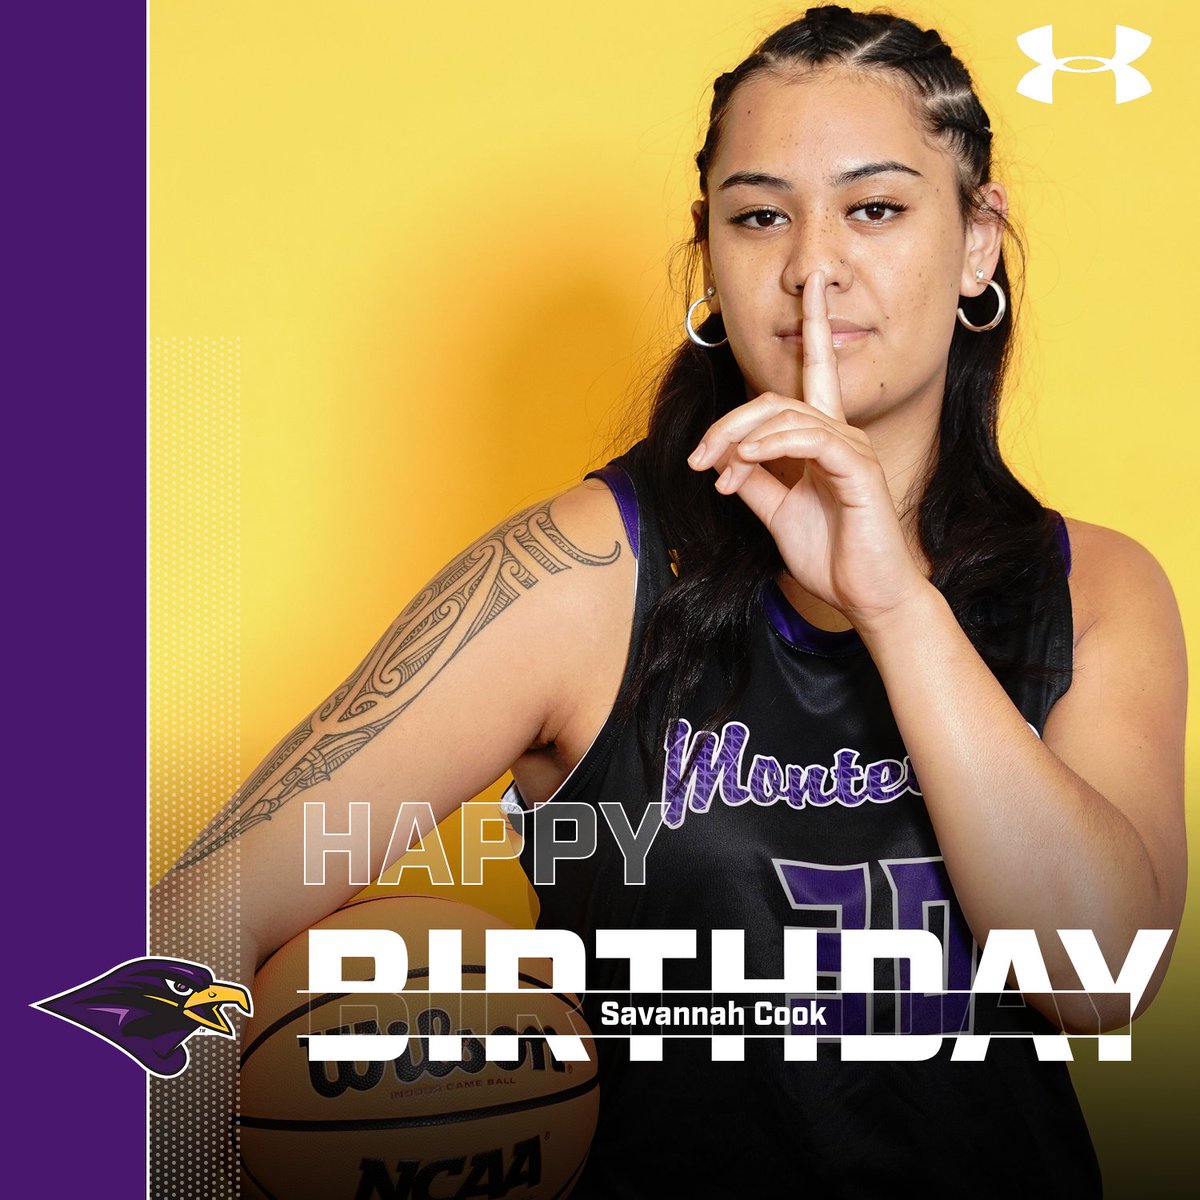 Falcon Nation, join us in wishing Savannah Cook a very Happy Birthday!! 🥳🎂🎁💜